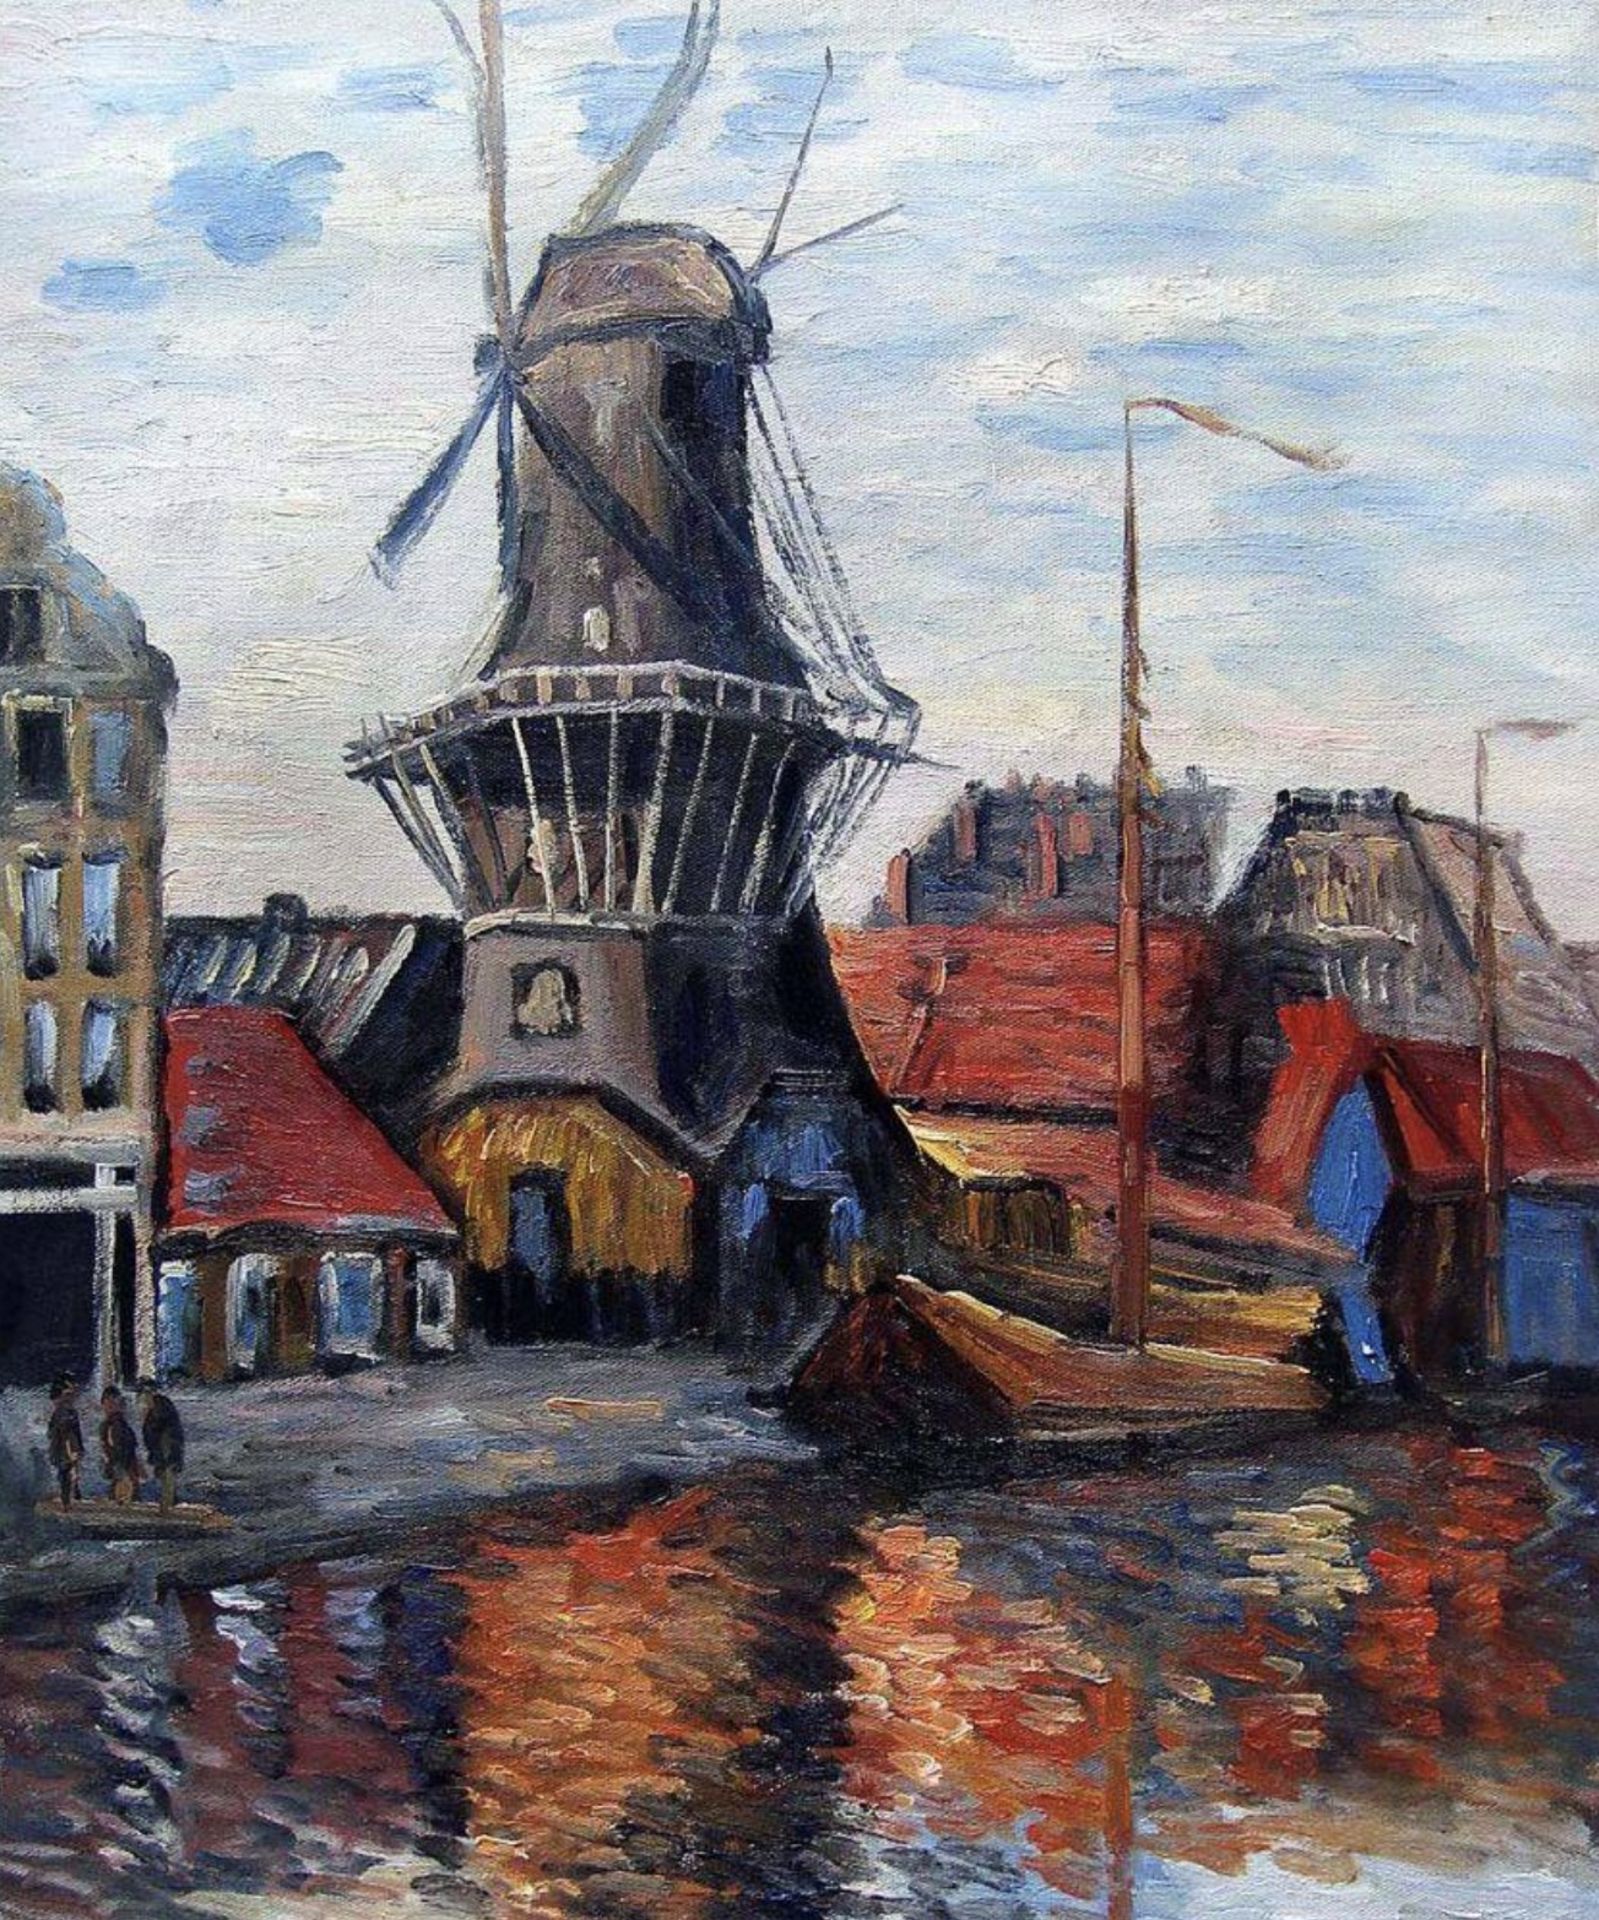 Claude Monet "Windmill on the Onbekende Canal, Amsterdam, 1874" Oil Painting